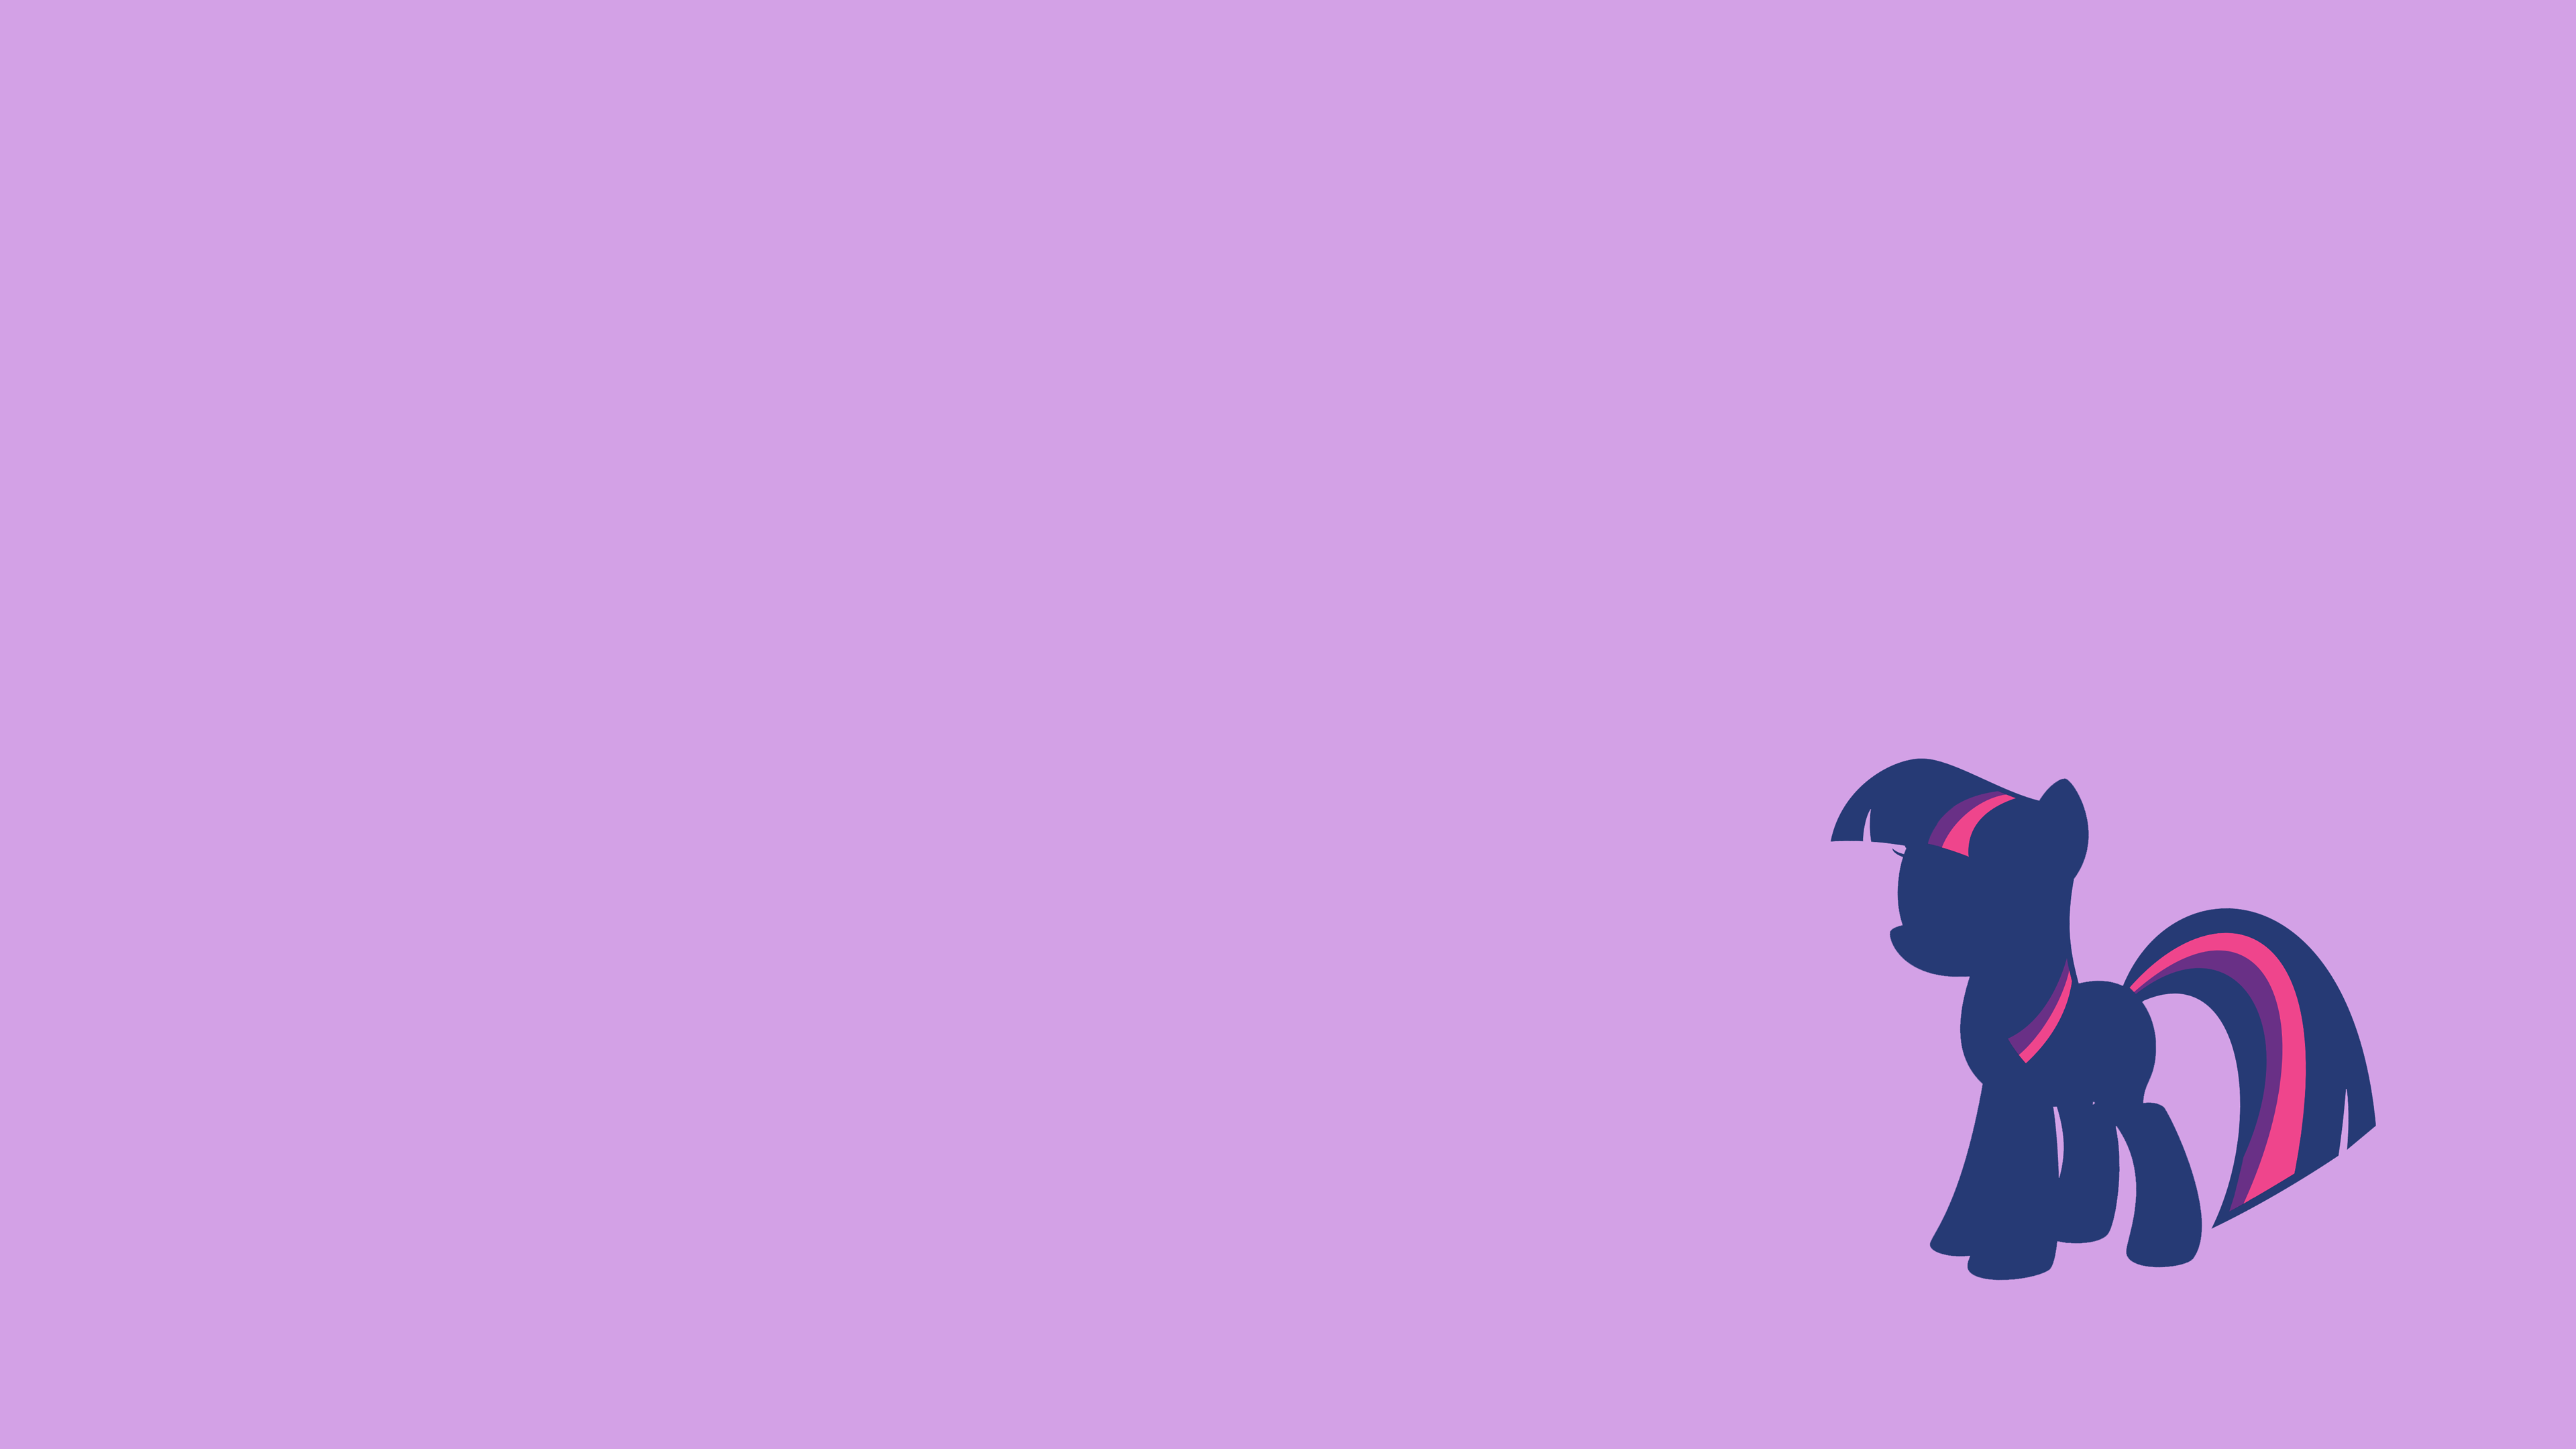 Simple Wallpapers - Twilight Sparkle by DaVca